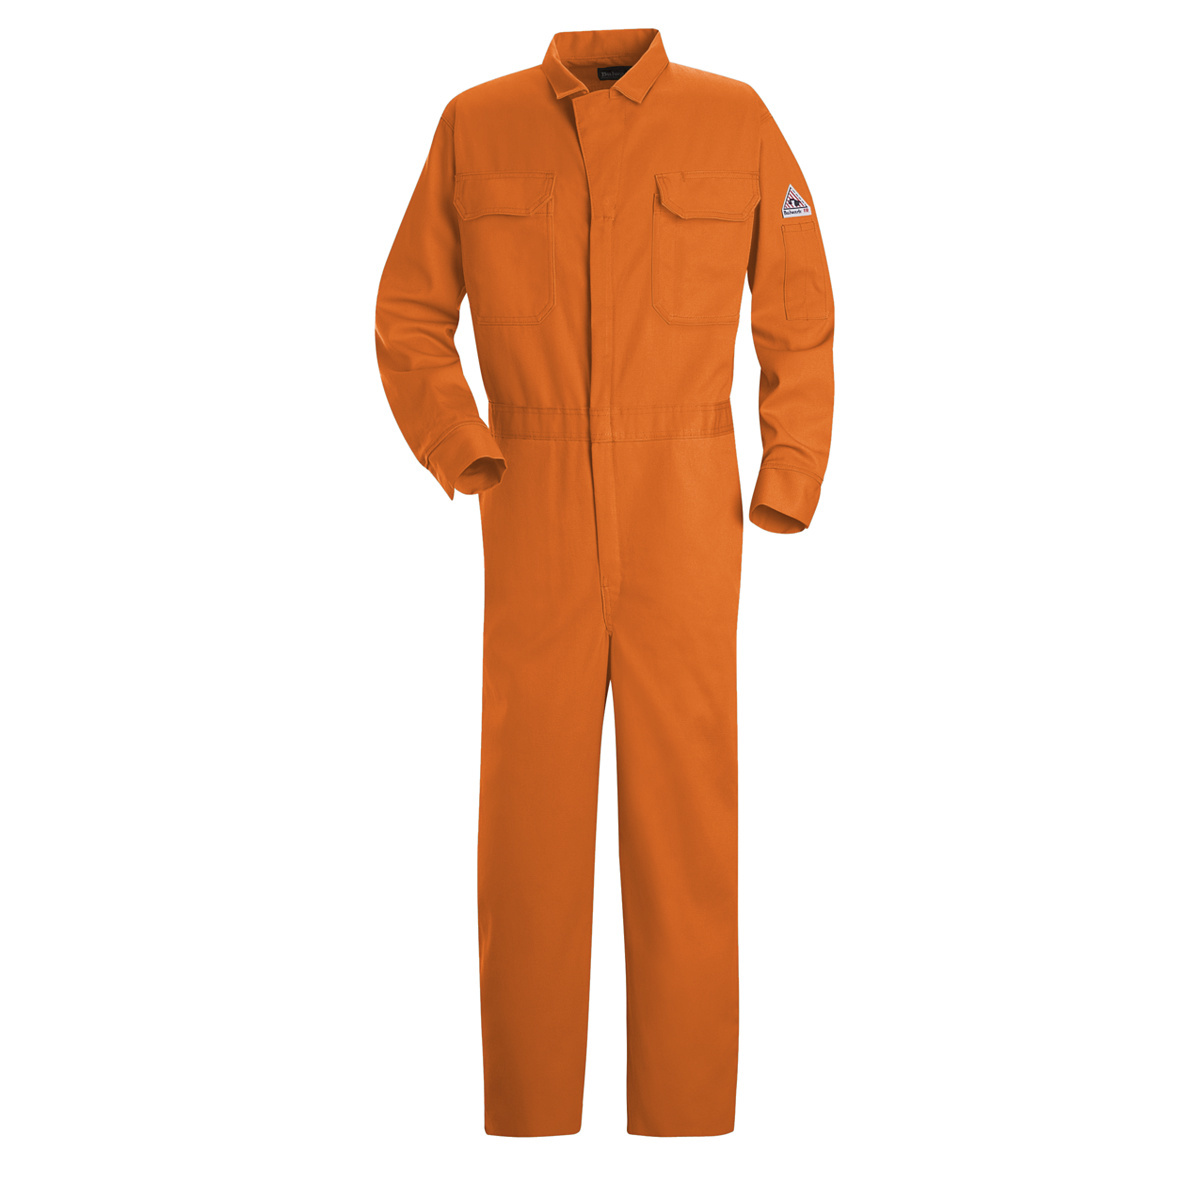 Bulwark® 50 Regular Orange EXCEL FR® Twill Cotton Flame Resistant Coveralls With Zipper Front Closure